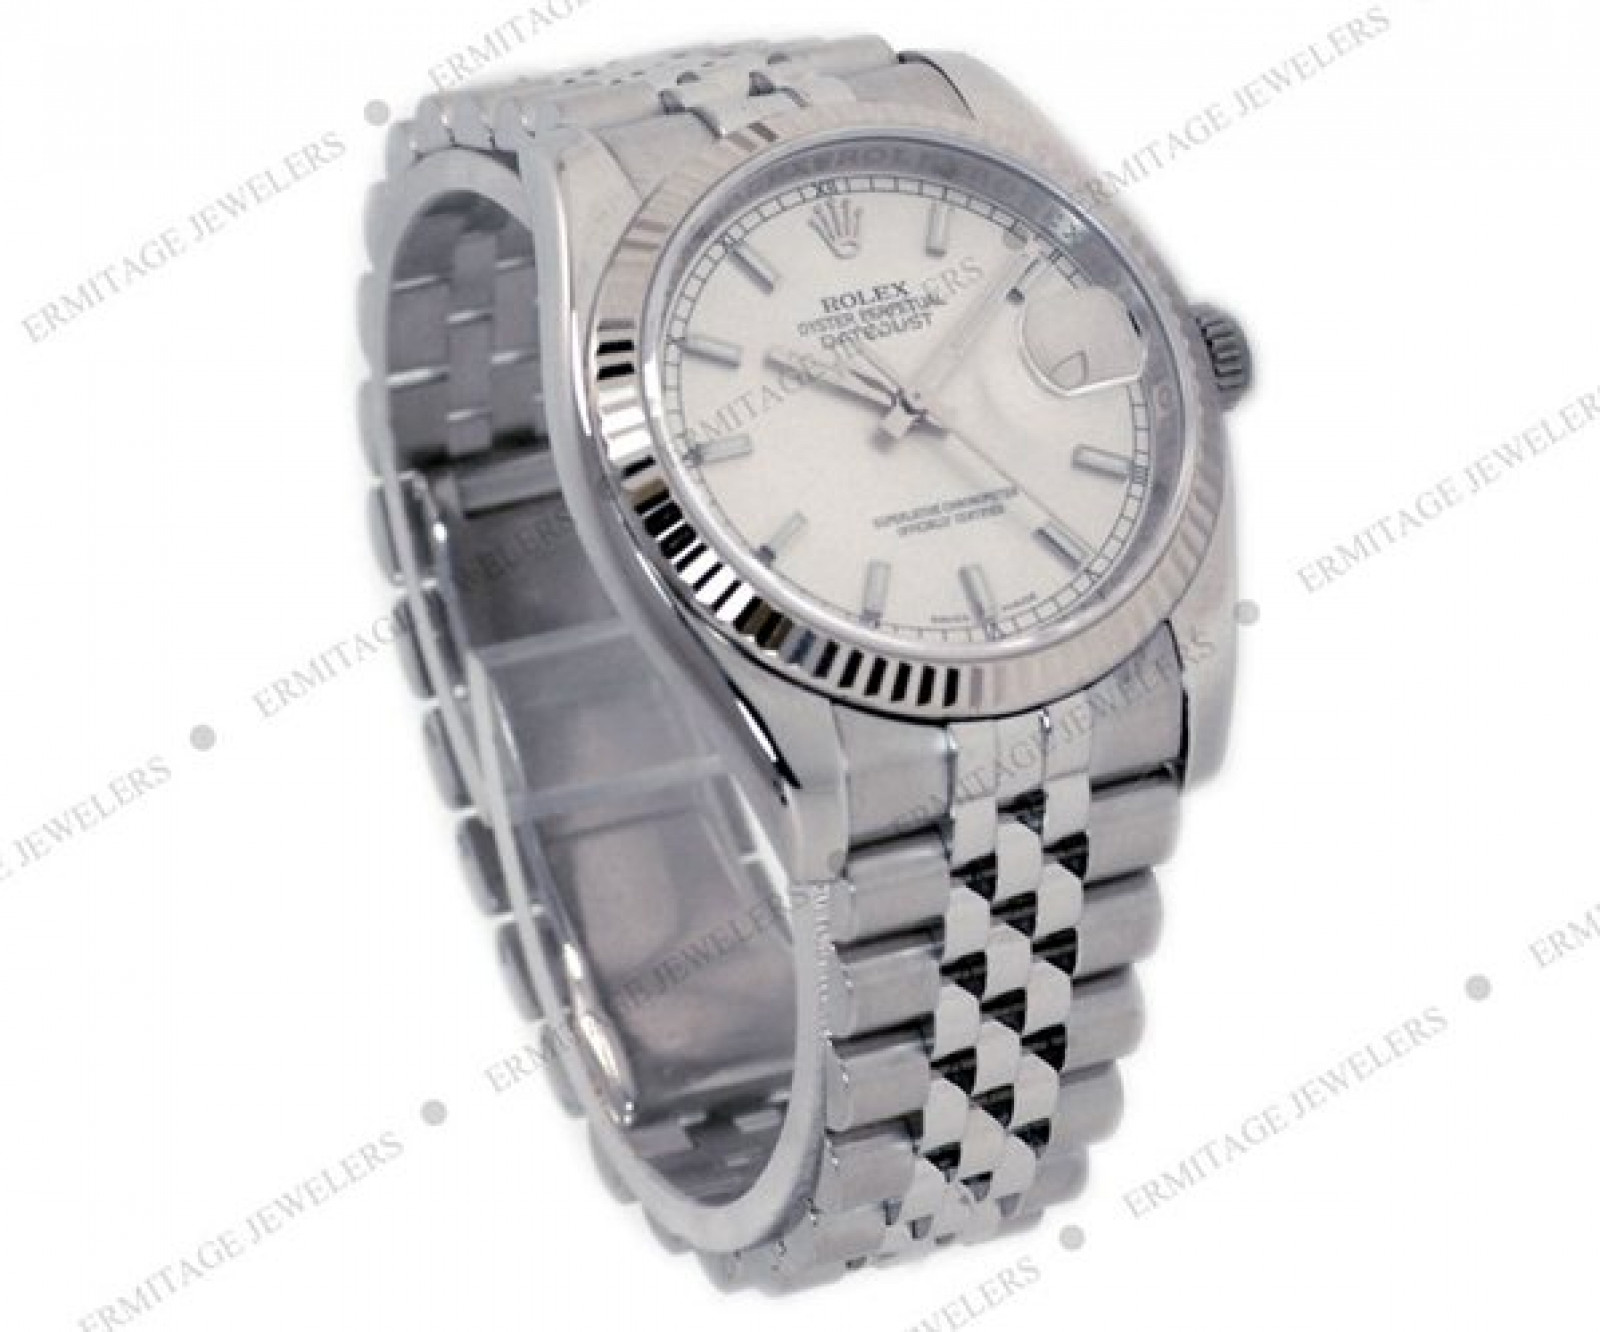 Rolex Datejust 116234 with 18 kt White Gold